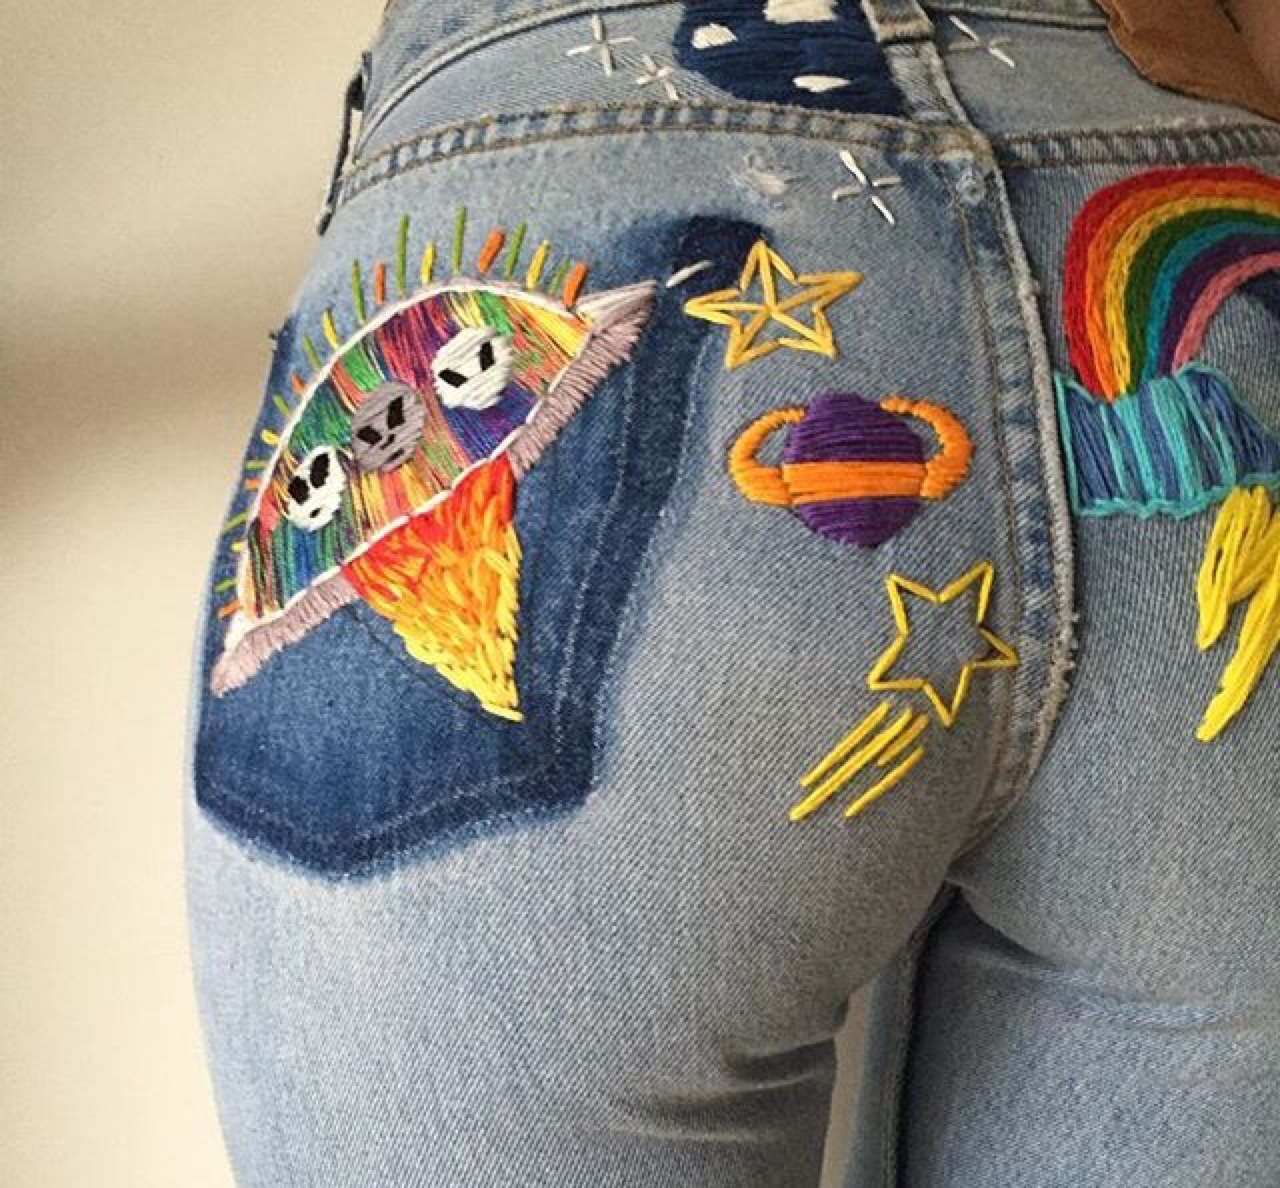 desiree b recommends Teens In Jeans Tumblr